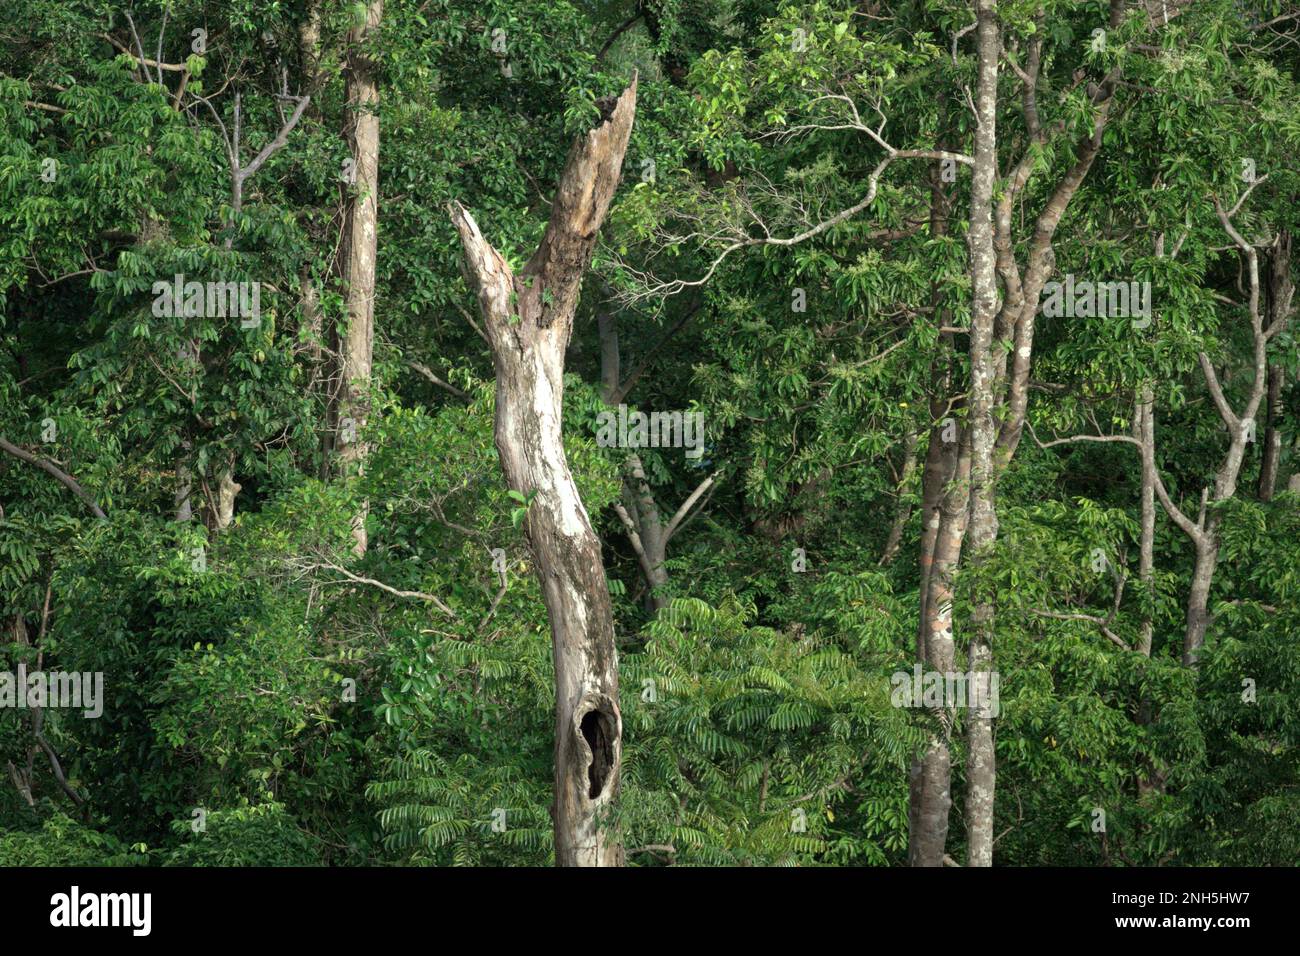 A dead tree with a hole on its trunk that has been surveyed as a potential nest by knobbed hornbills, or sometimes called Sulawesi wrinkled hornbill (Rhyticeros cassidix), which is located in a rainforest area near Mount Tangkoko and DuaSudara in Bitung, North Sulawesi, Indonesia. 'Much of the public perception of the effects of the climate crisis is related to scenarios calculated for 2050 and beyond. Yet the effects of the climate crisis are current and can manifest not just within our lifetime, but even over a single decade,' said Dr. Nicholas Pattinson (University of Cape Town). Stock Photo